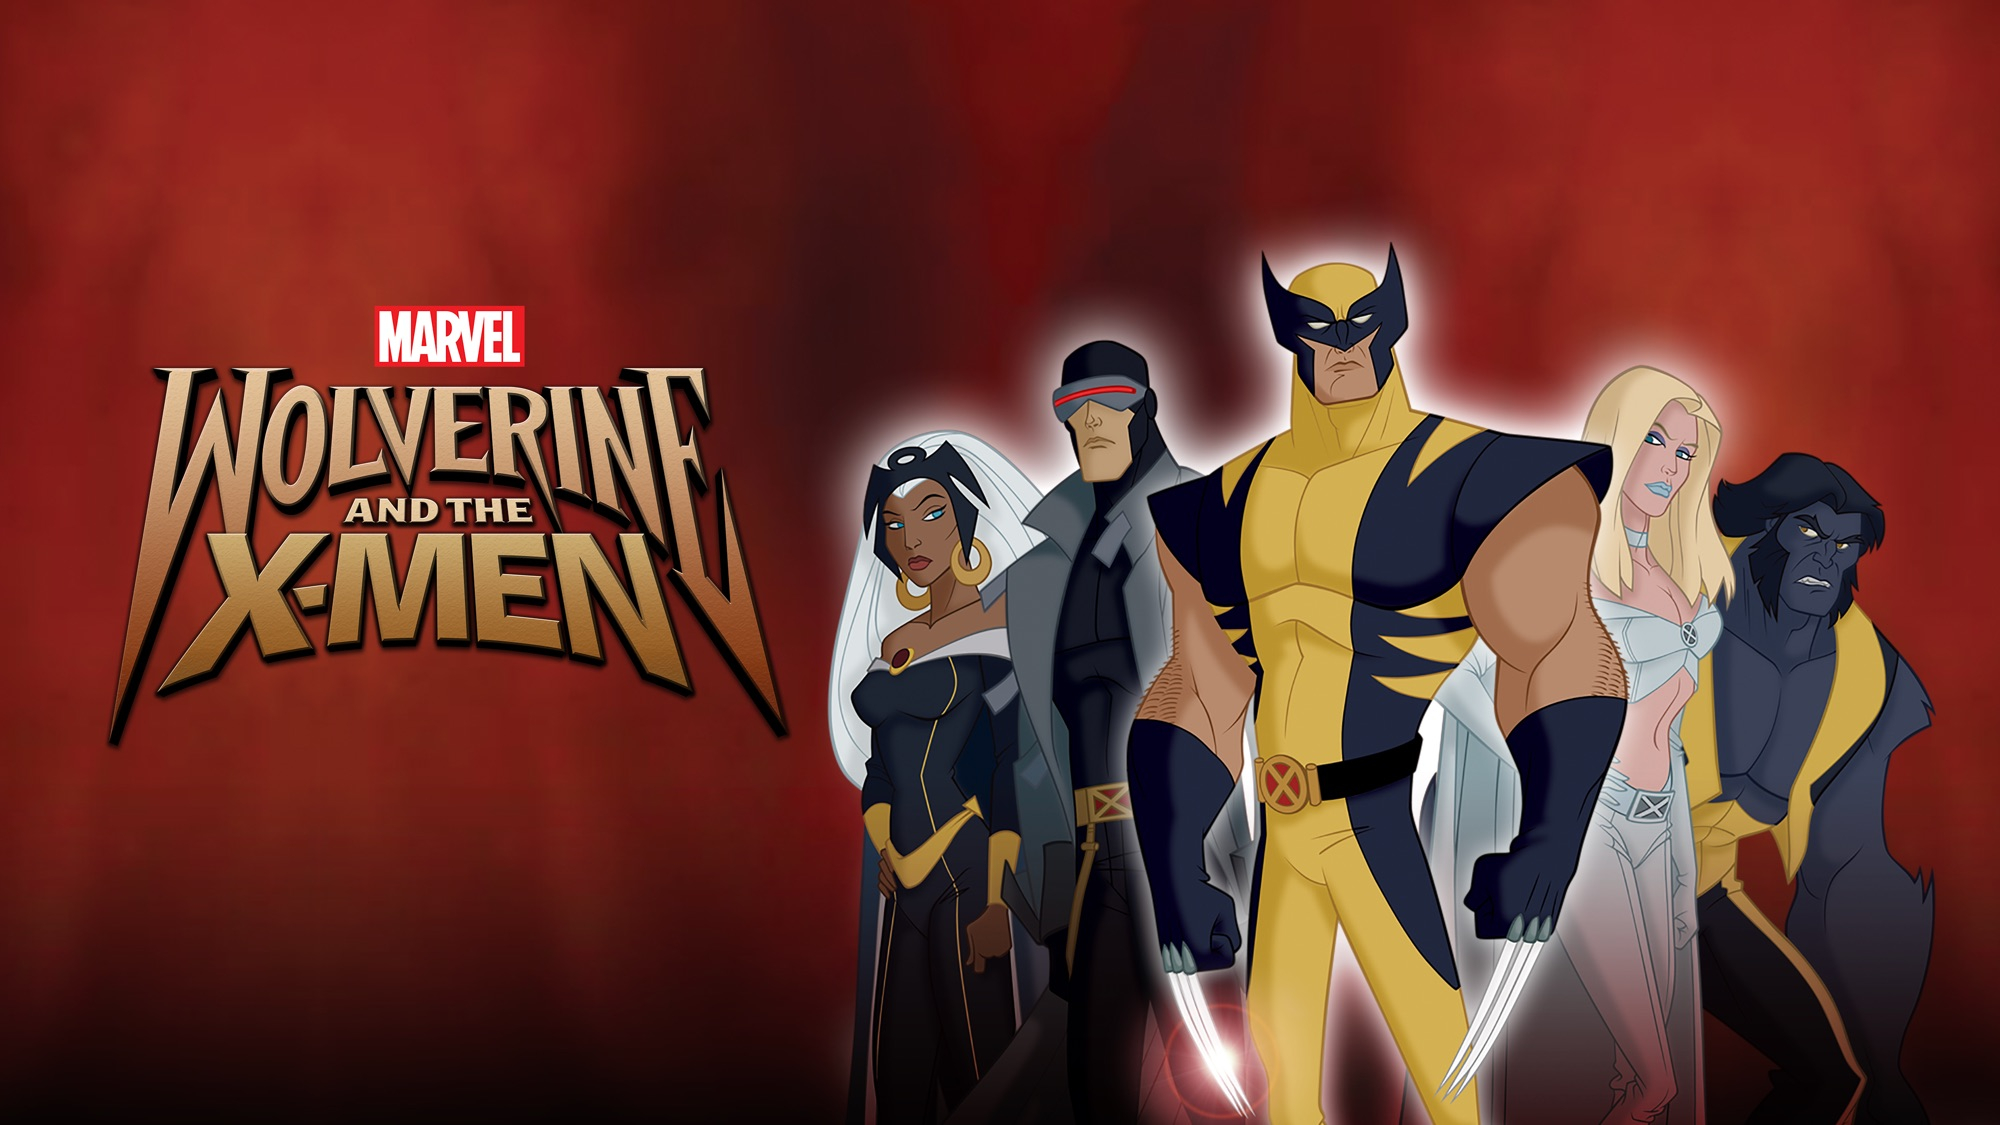 2000x1125 10+ Wolverine and the X-Men HD Wallpapers and Backgrounds